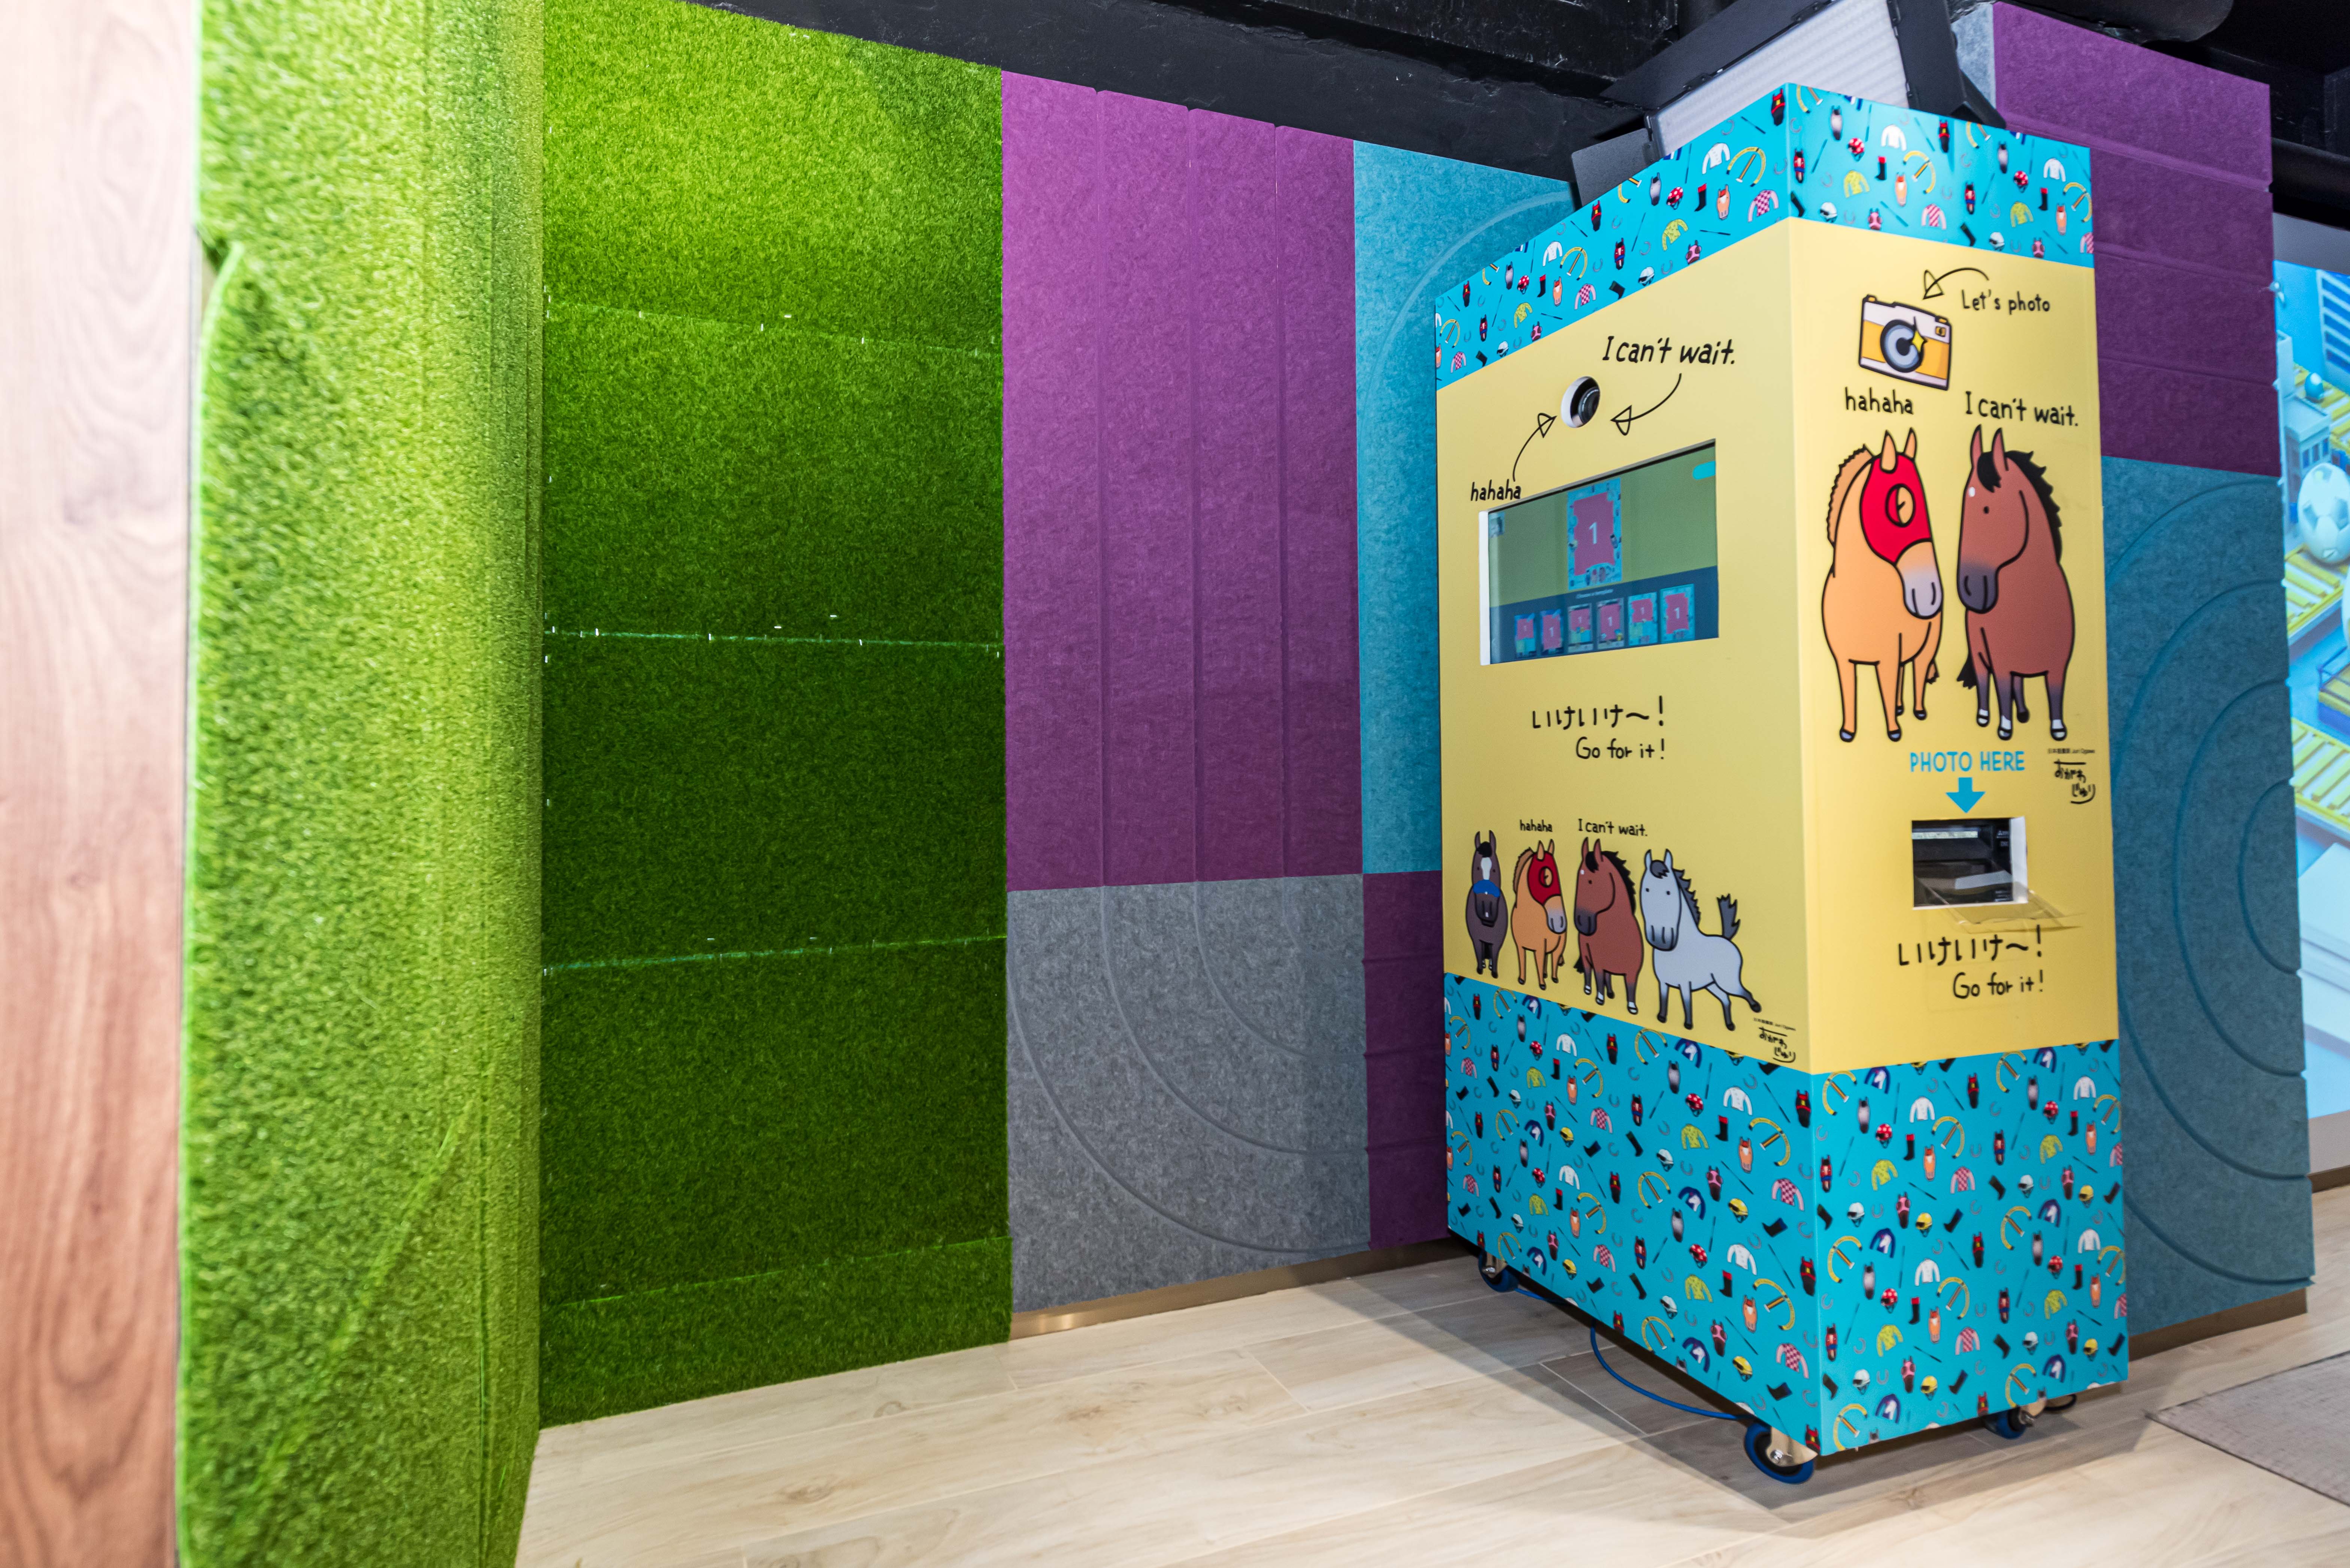 The photo booth, only available for a limited period, takes pictures of customers decorated with adorable horse and football cartoon.